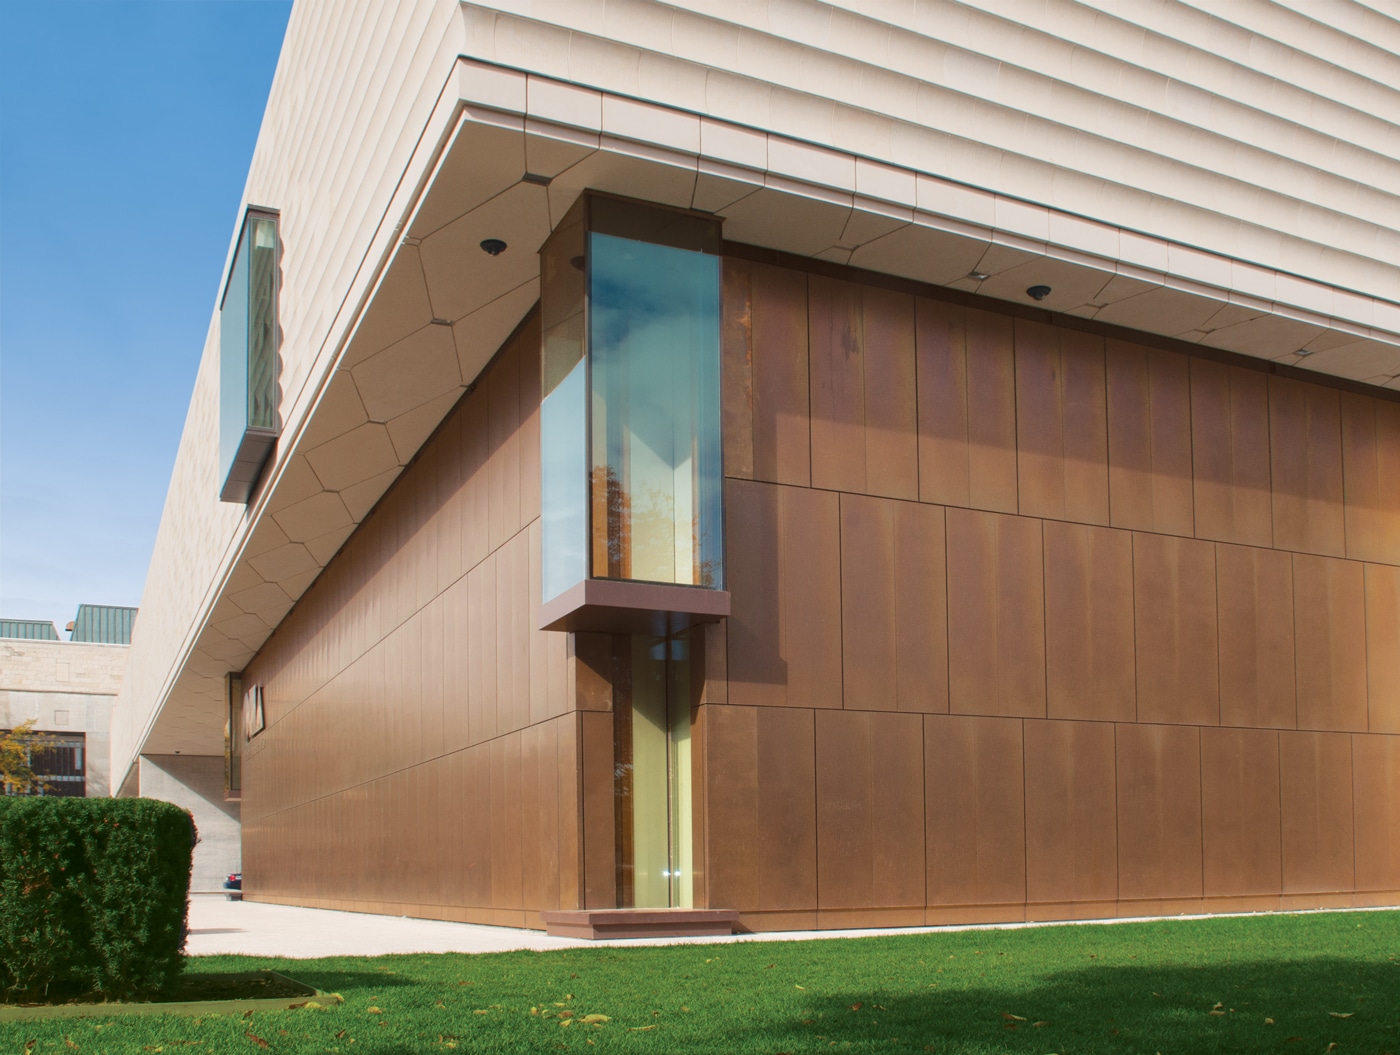 Image of corner window and two walls at Chazen Museum of Art in Madison, Wisconsin. Patined bronze wall surface. Rainscreen cladding system by Riverside Group.